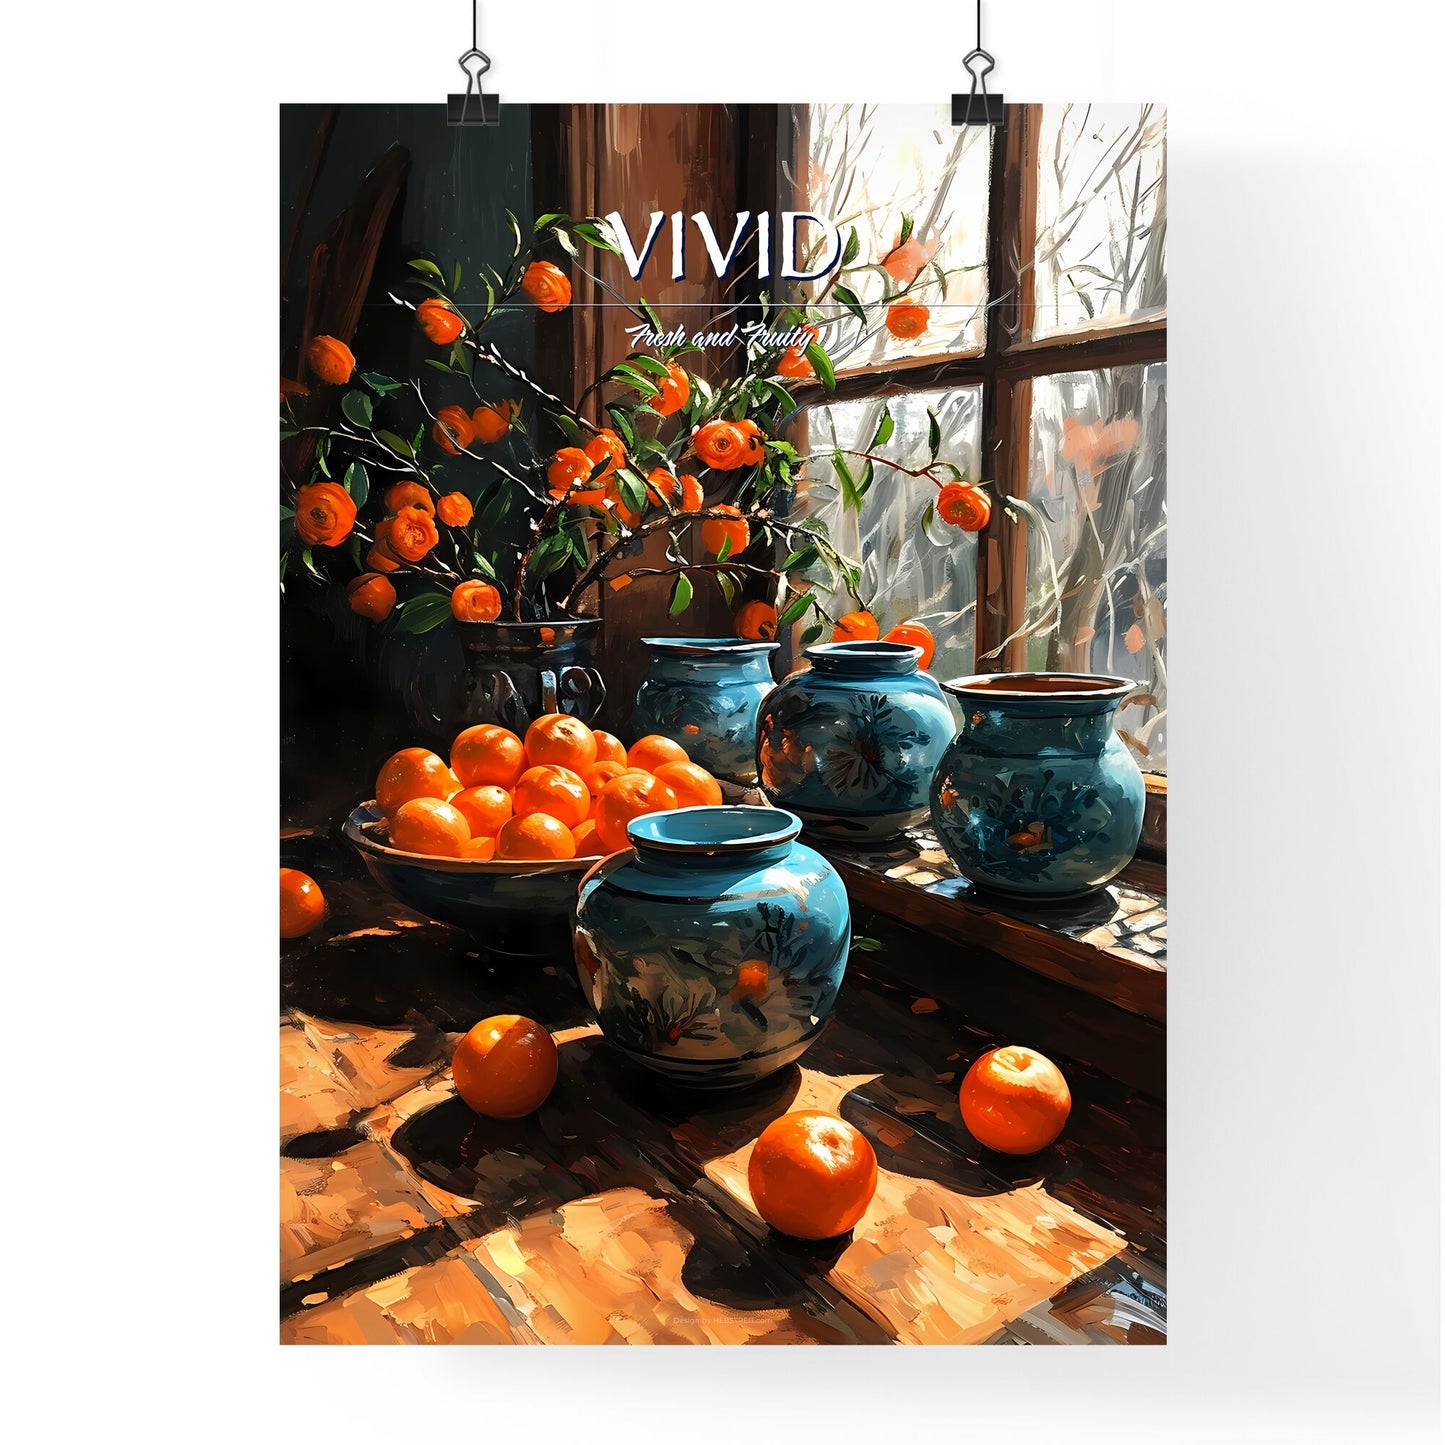 A Poster of impressionistic still life - A Vases And Oranges On A Window Sill Default Title